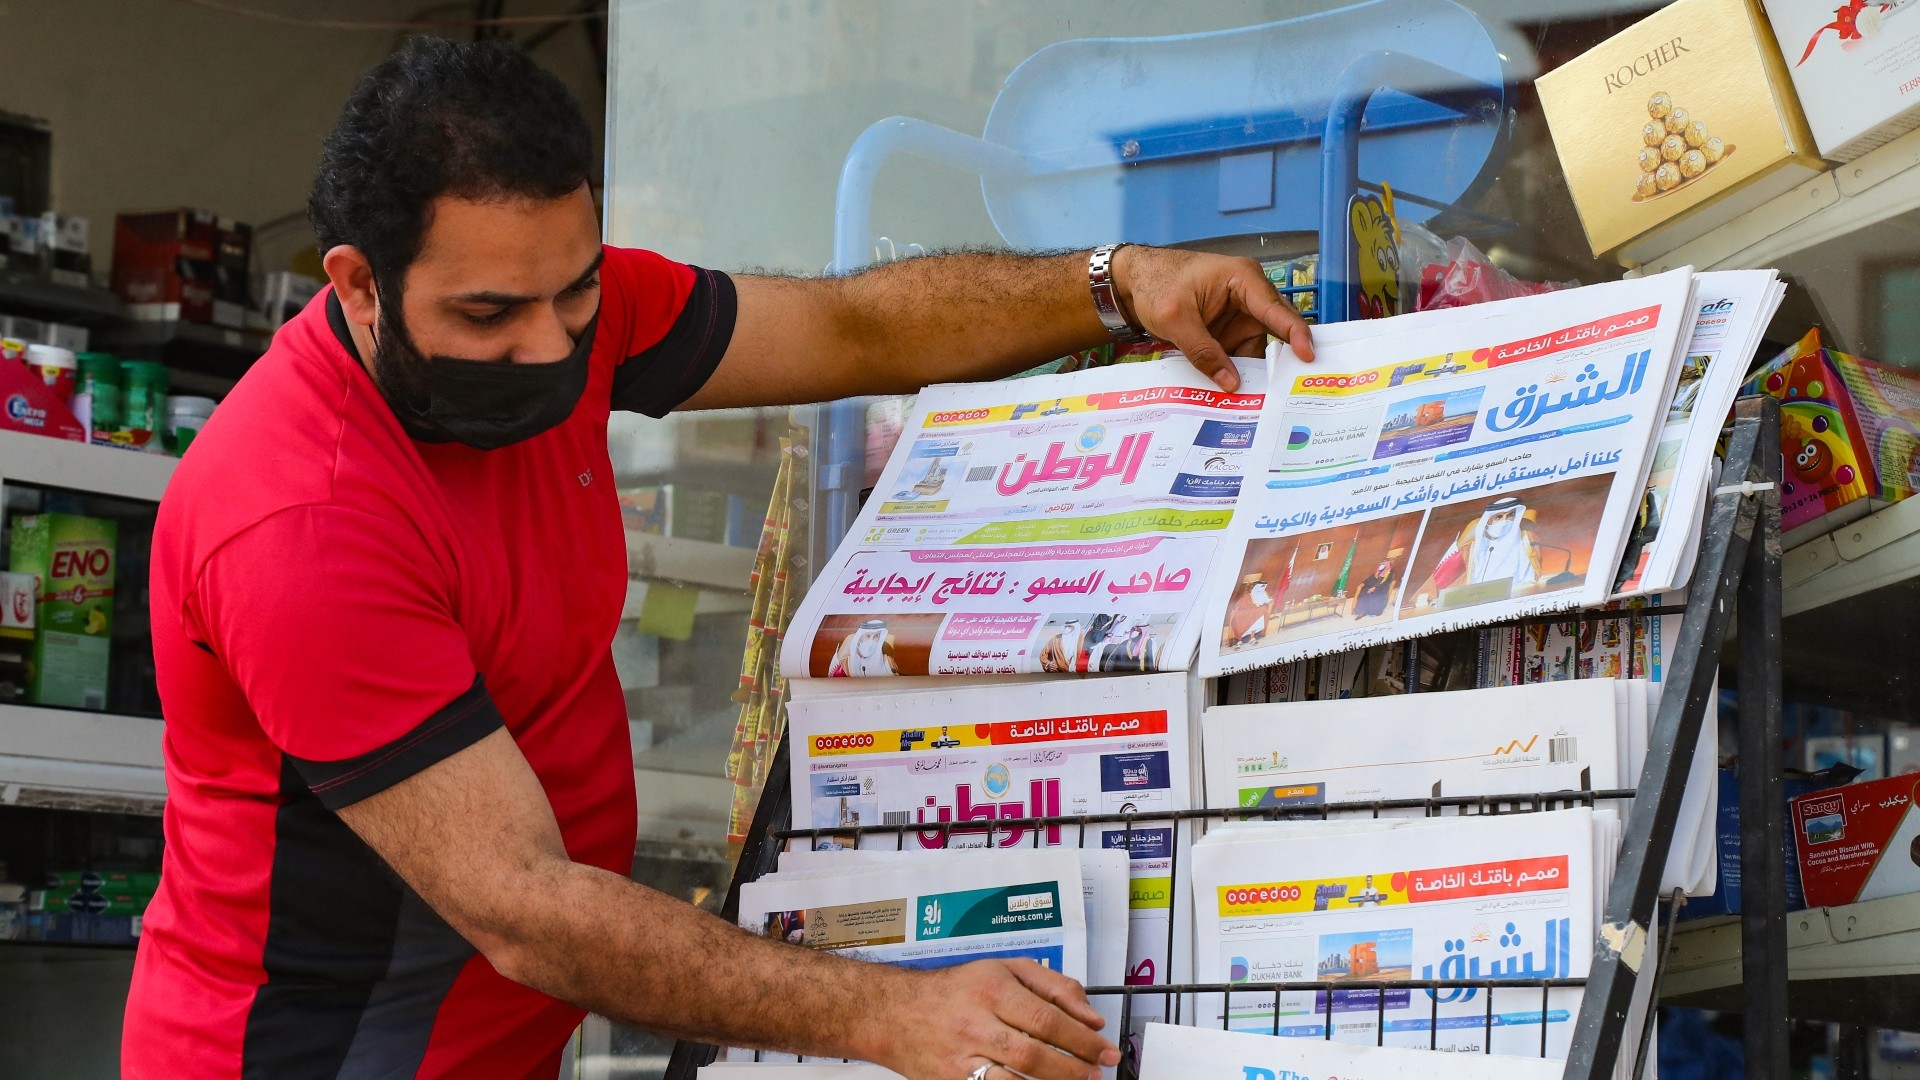 A man arranges newspapers on a stand outside a shop in Doha showing headlines about the summit in al-Ula in 2021, which saw Qatar's relations restored with other Gulf states (AFP)